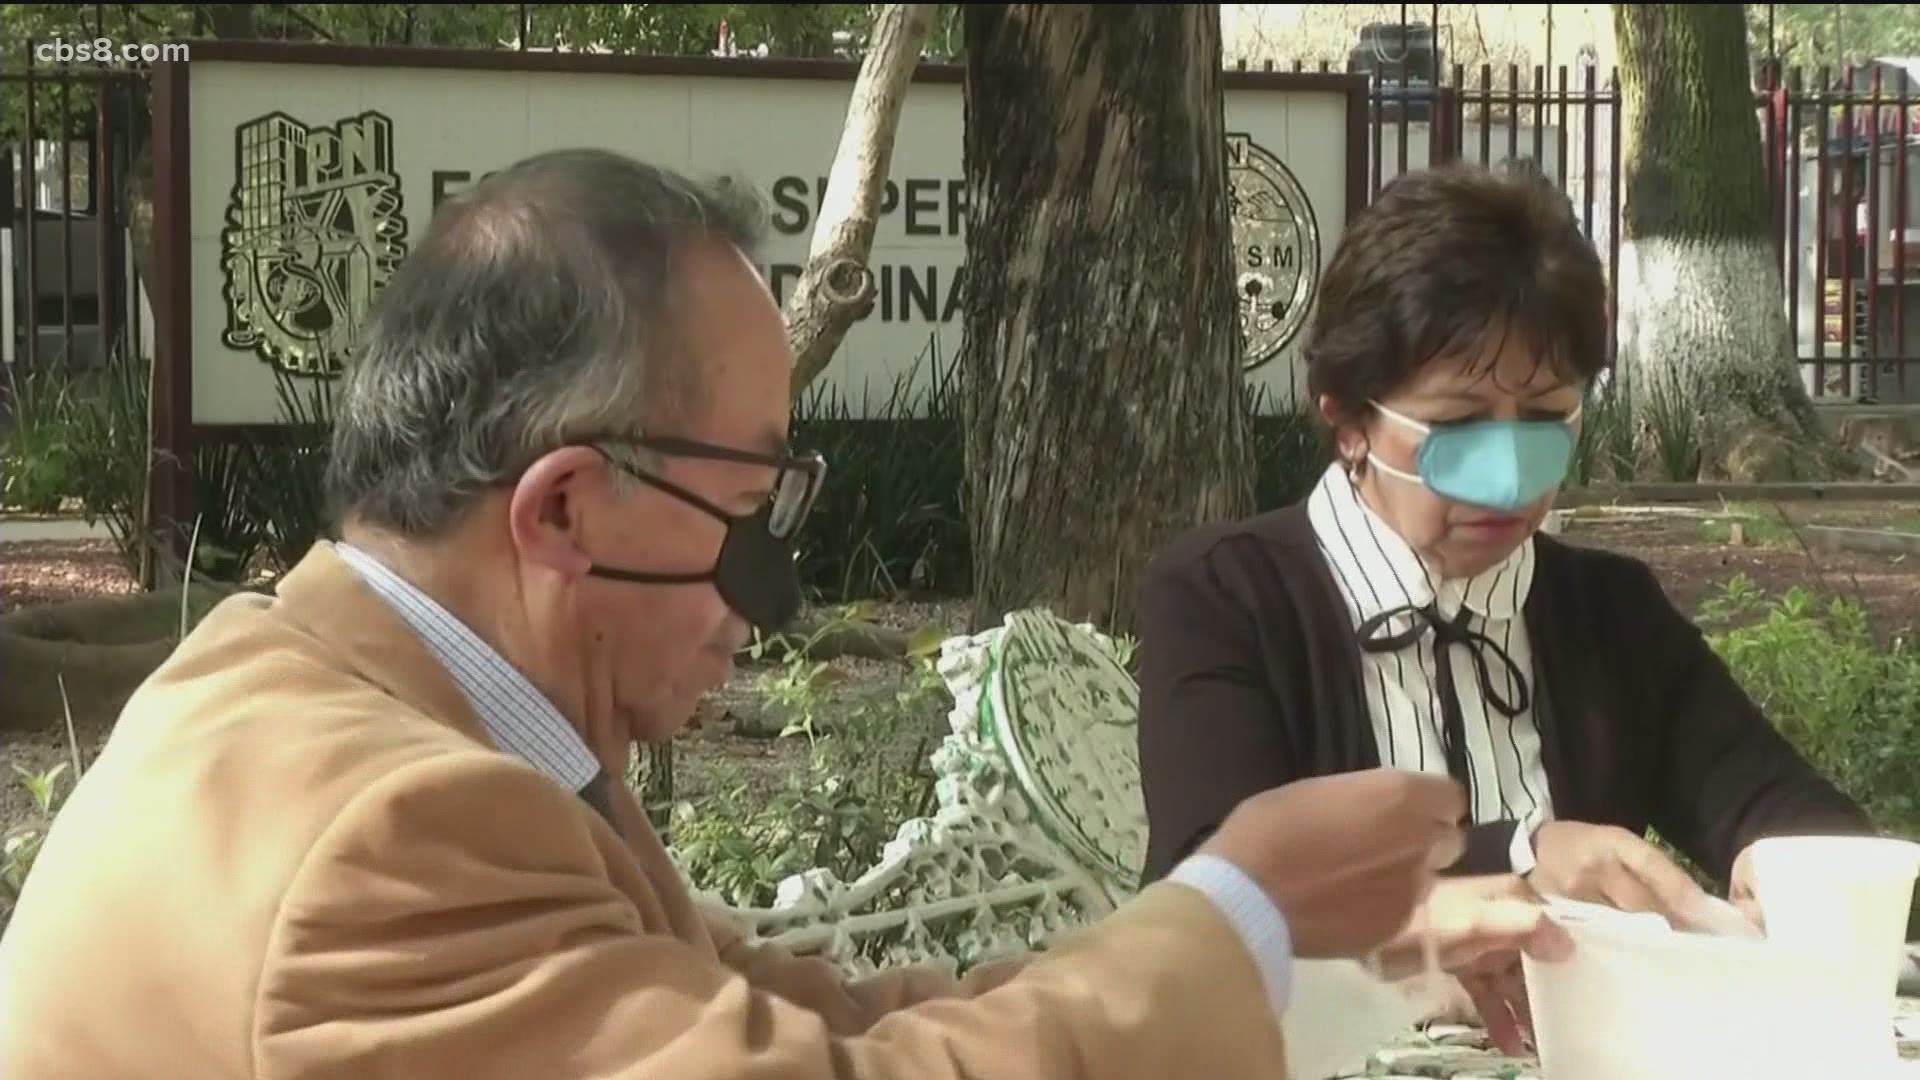 Researchers in Mexico unveil nose-only COVID-19 mask for use while